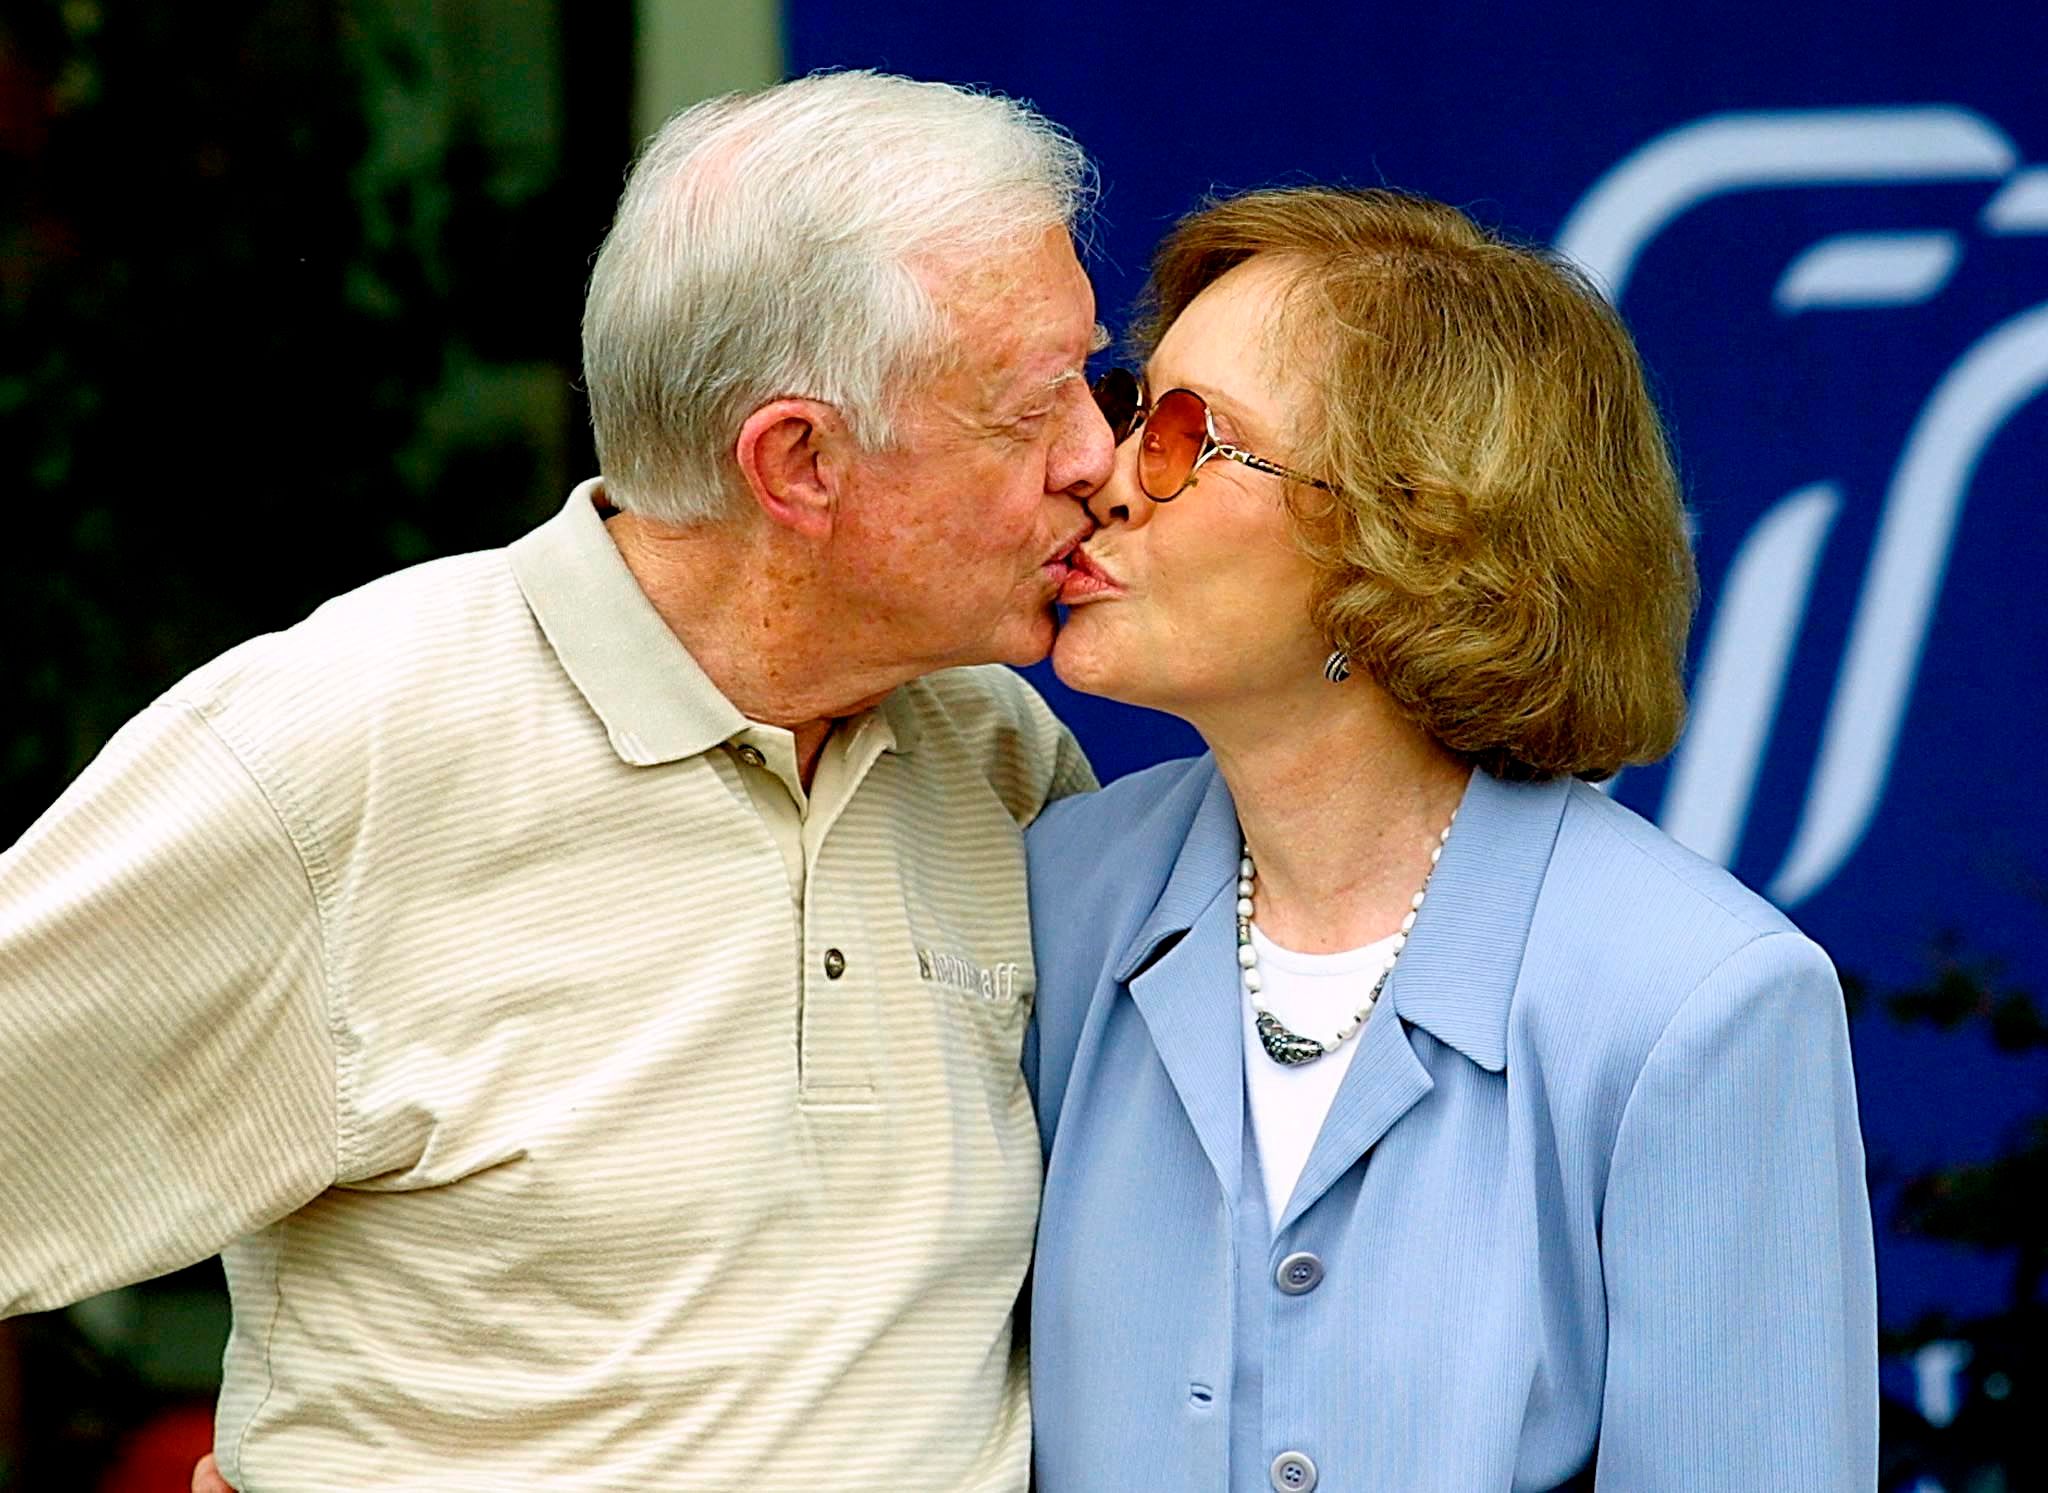 Jimmy Carter and Rosalynn Carter after a press conference in Plains, Georgia, on October 11, 2002 | Source: Getty Images